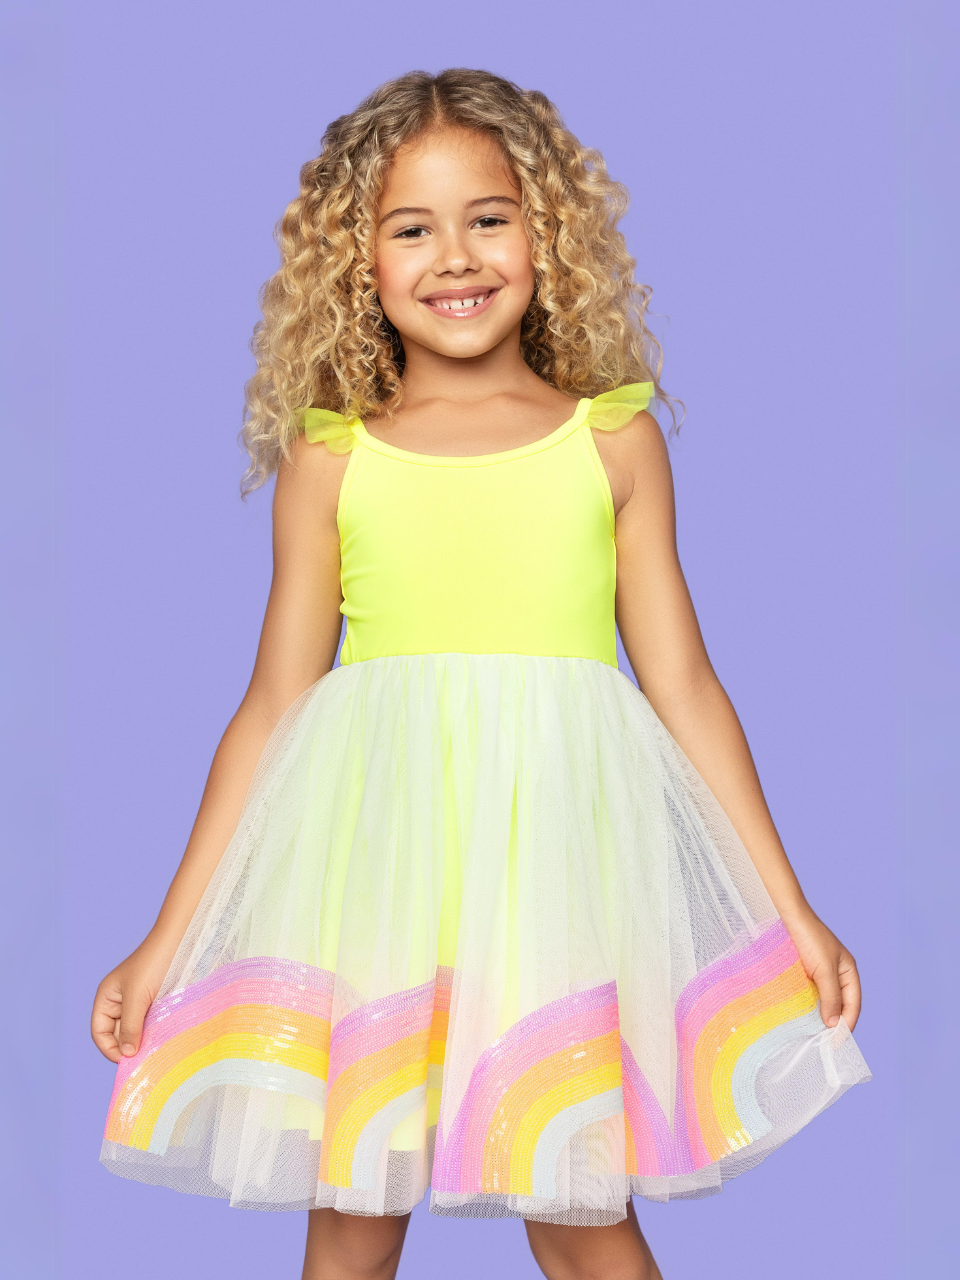 A young girl wearing a bright yellow dress with a rainbow of sequins on the skirt.